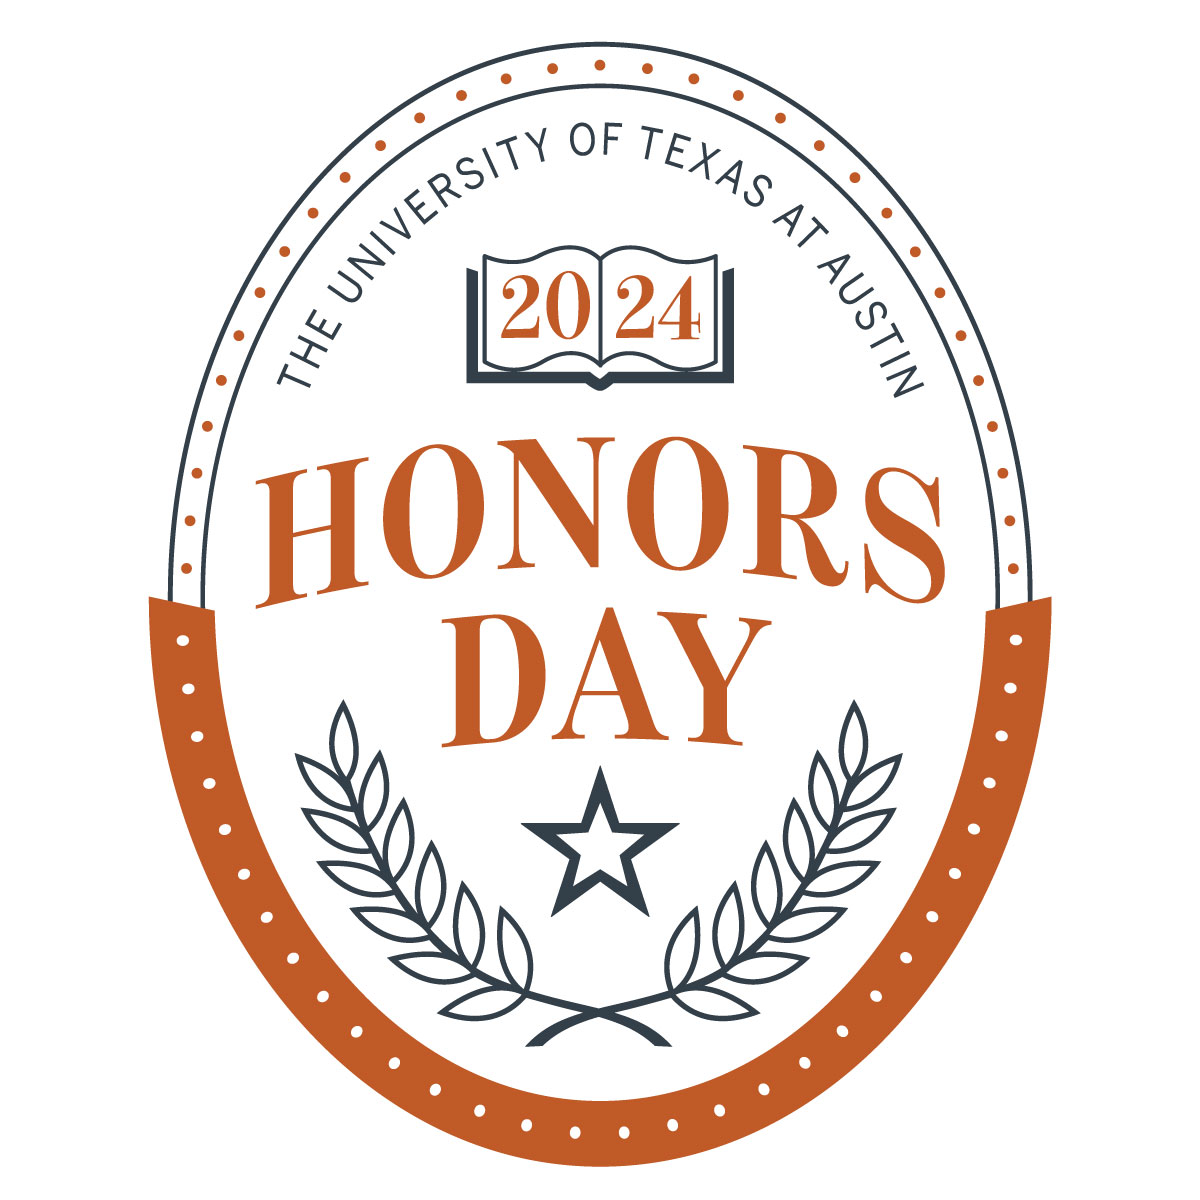 Today, the School of Nursing will recognize the highest-achieving students during the 2024 Honors Day Celebration. Way to go Longhorns! Hook 'em! #TEXASNursing #WhatStartsHere #UTHonorsDay